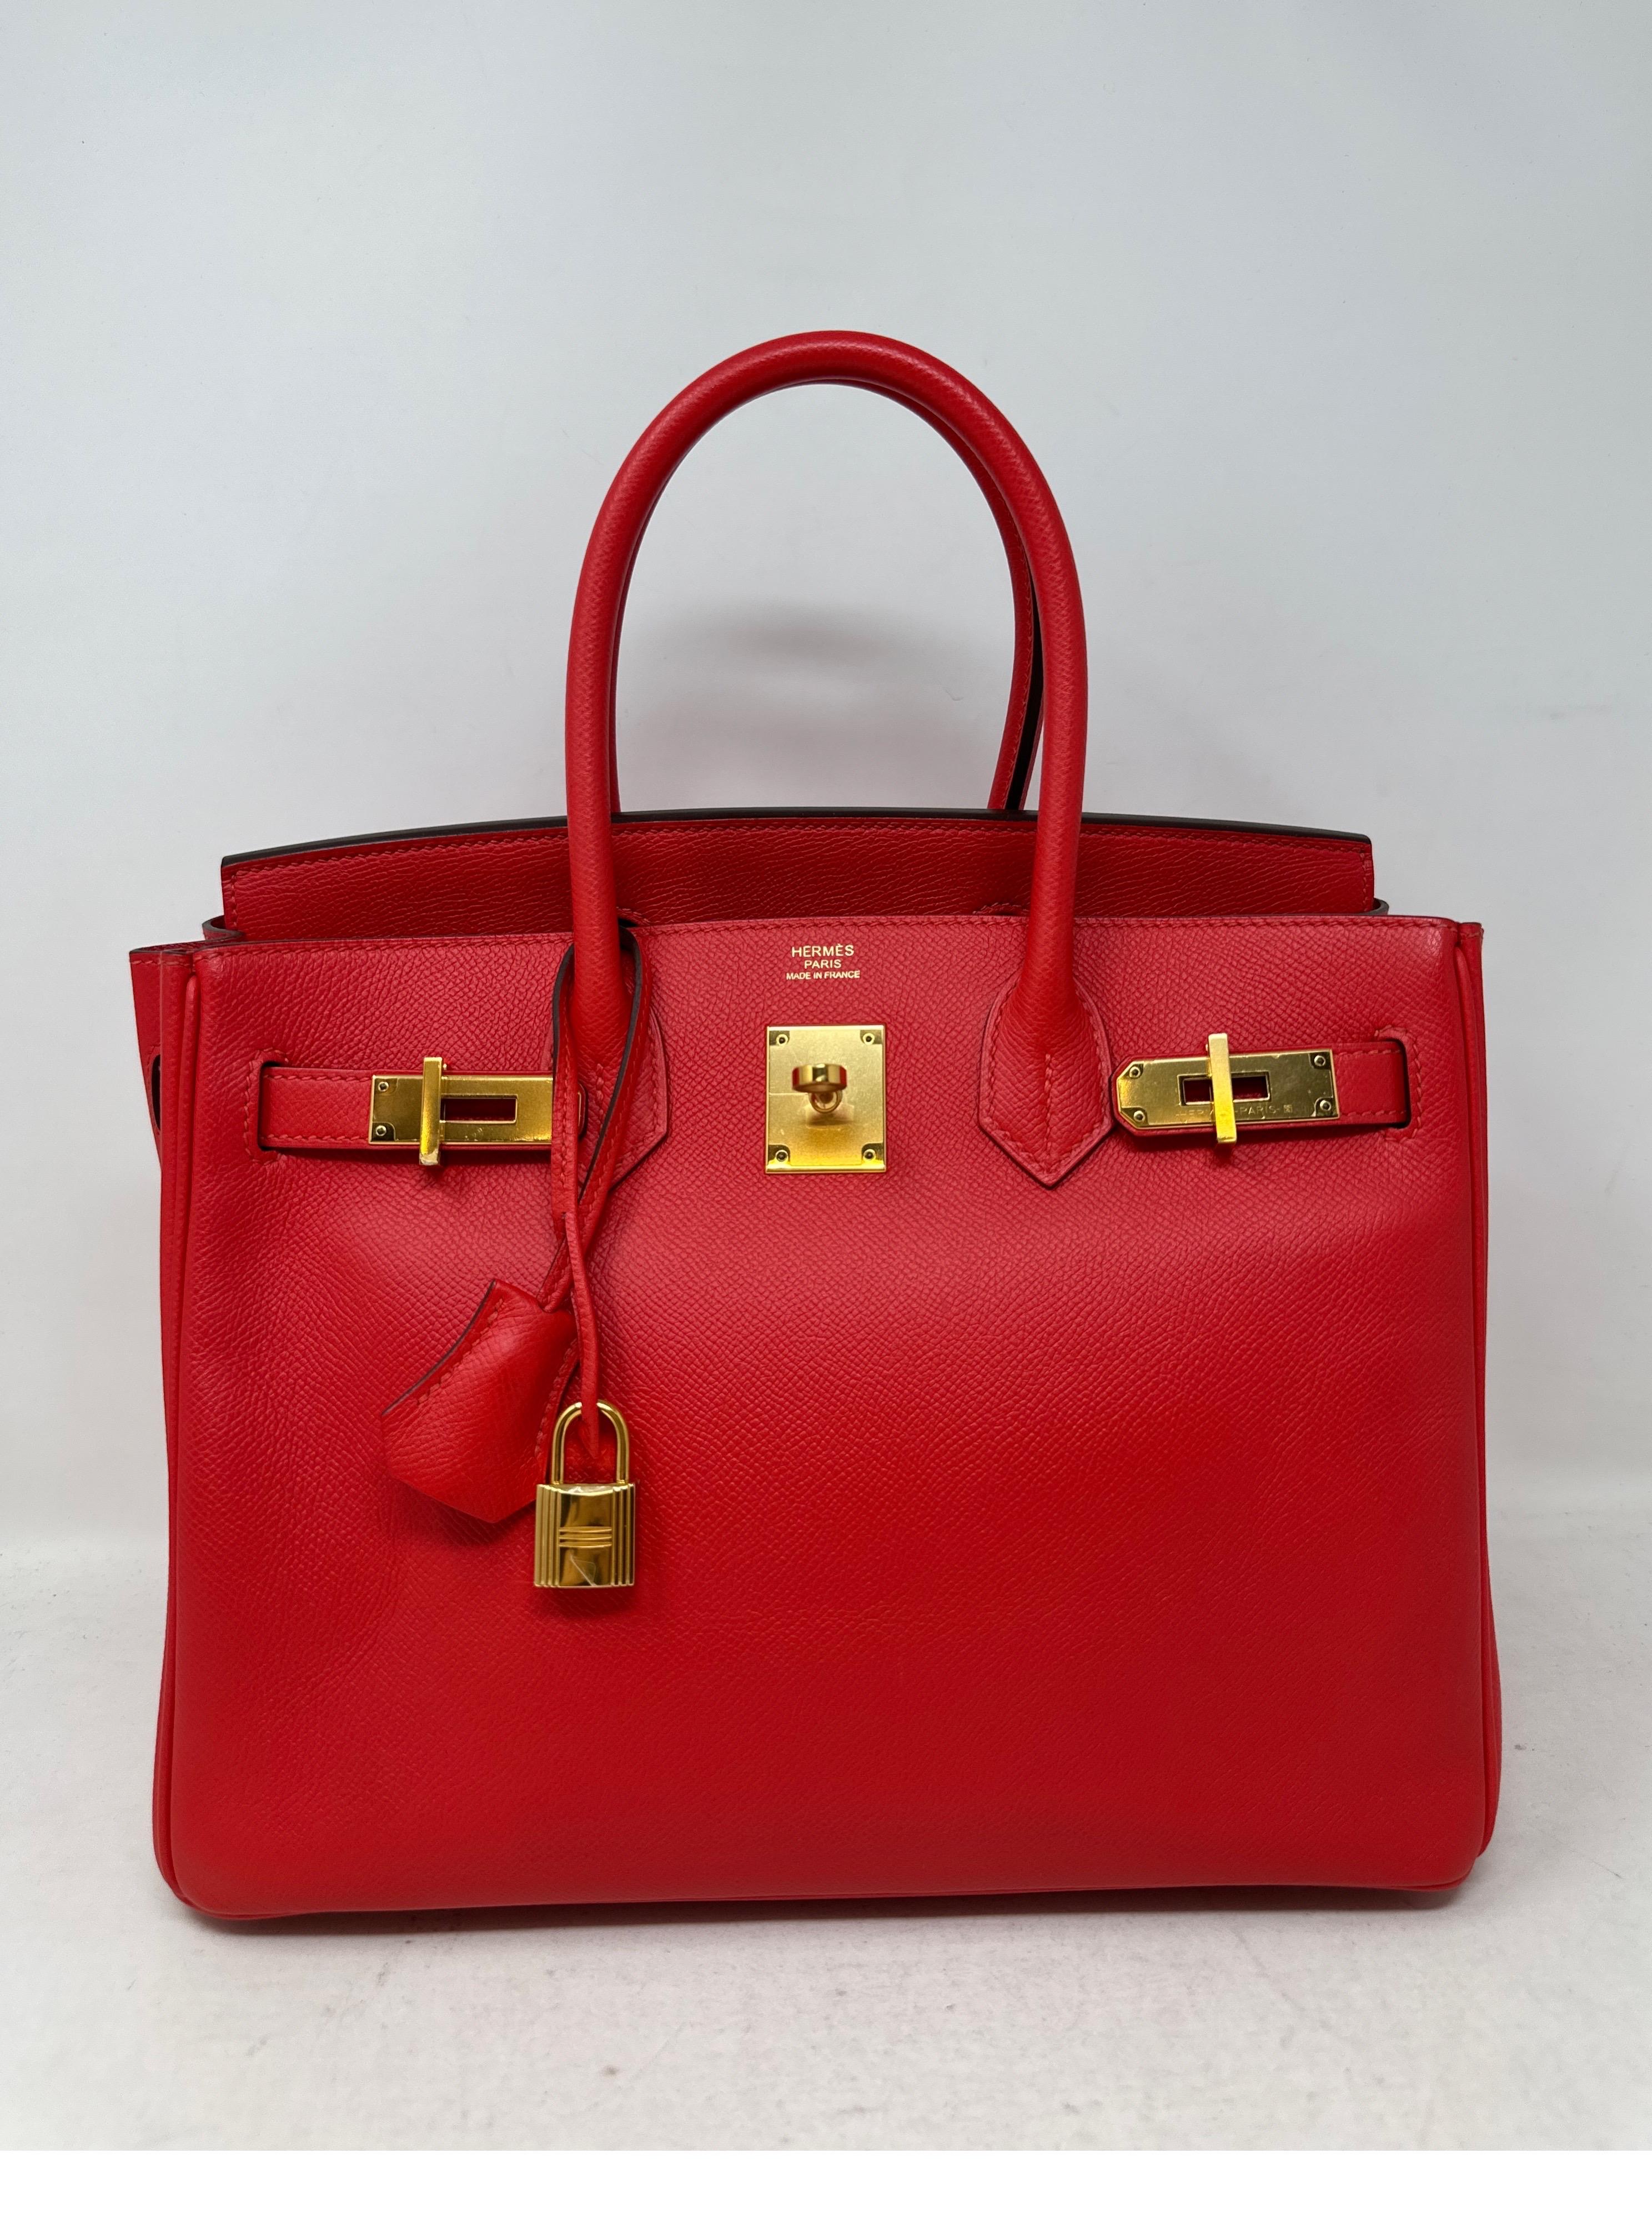 Hermes Rouge Tomate Birkin 30 Bag. Beautiful vibrant red Birkin bag. Looks like tomato red. Excellent like new condition. Interior clean. Gold hardware. Epsom leather. Most wanted size. Includes clochette, lock, keys, and dust bag. Guaranteed